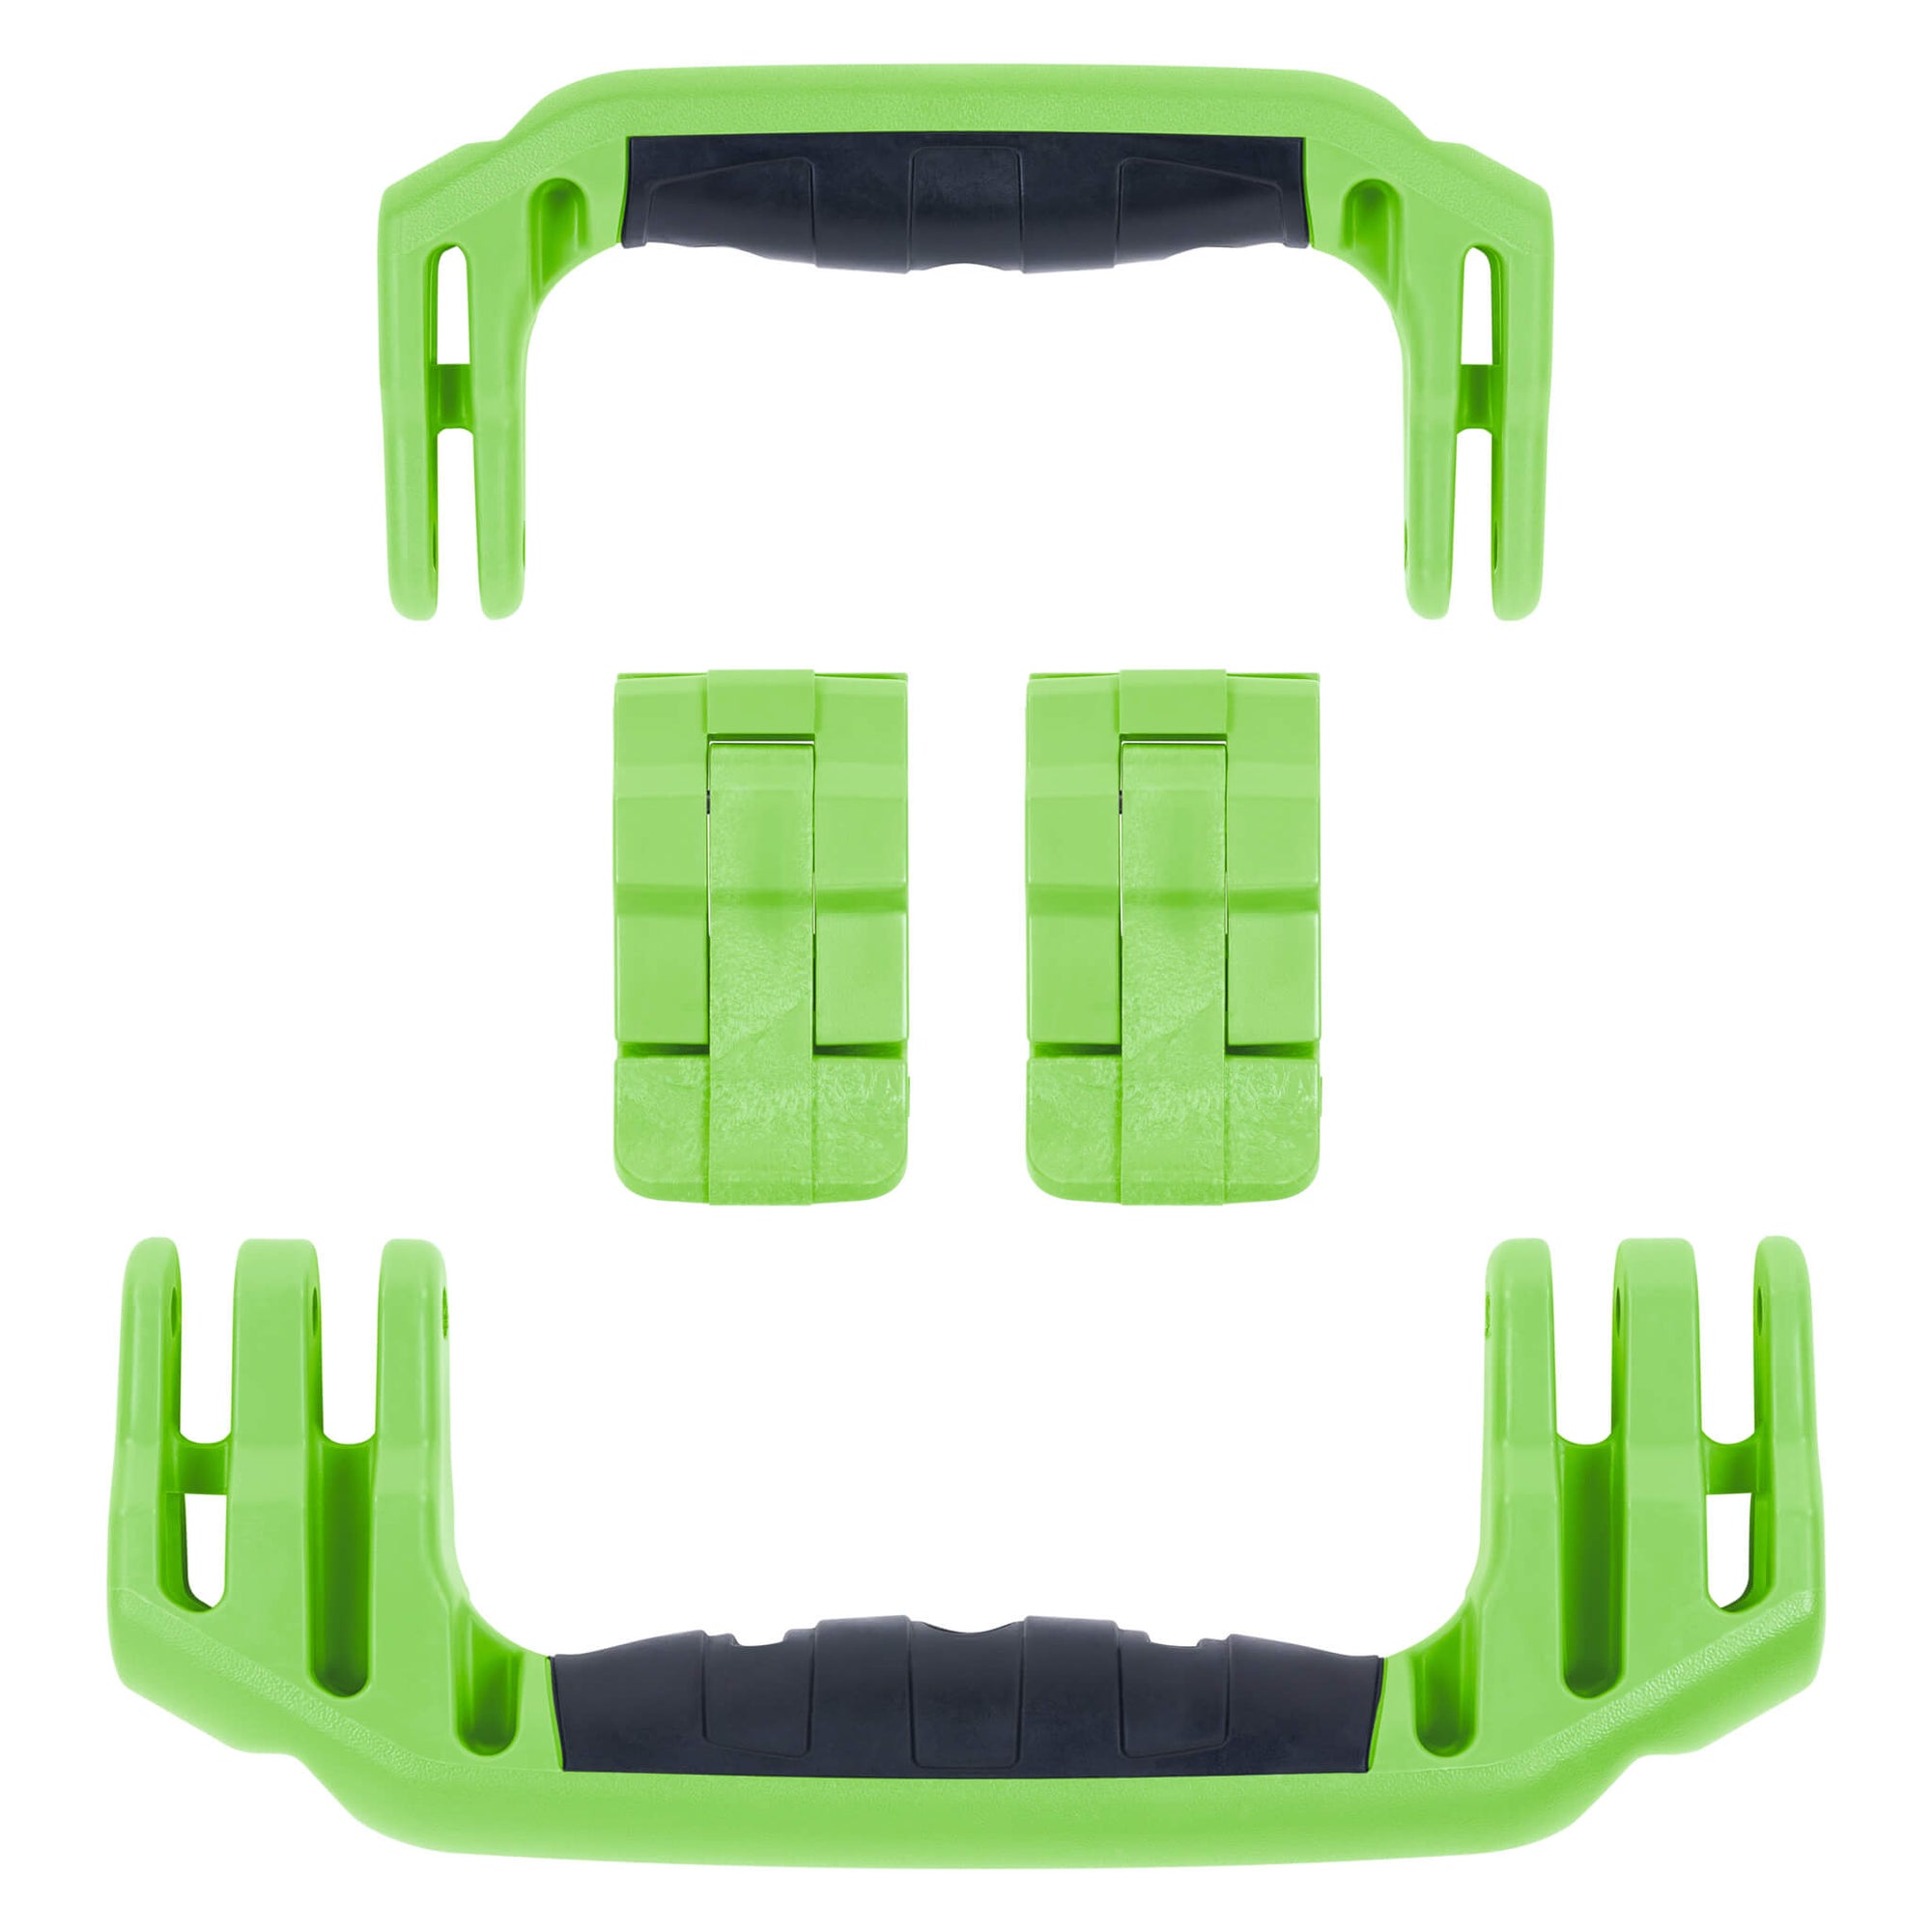 Pelican 1510 Replacement Handles & Latches, Lime Green (Set of 2 Handles, 2 Latches) ColorCase 